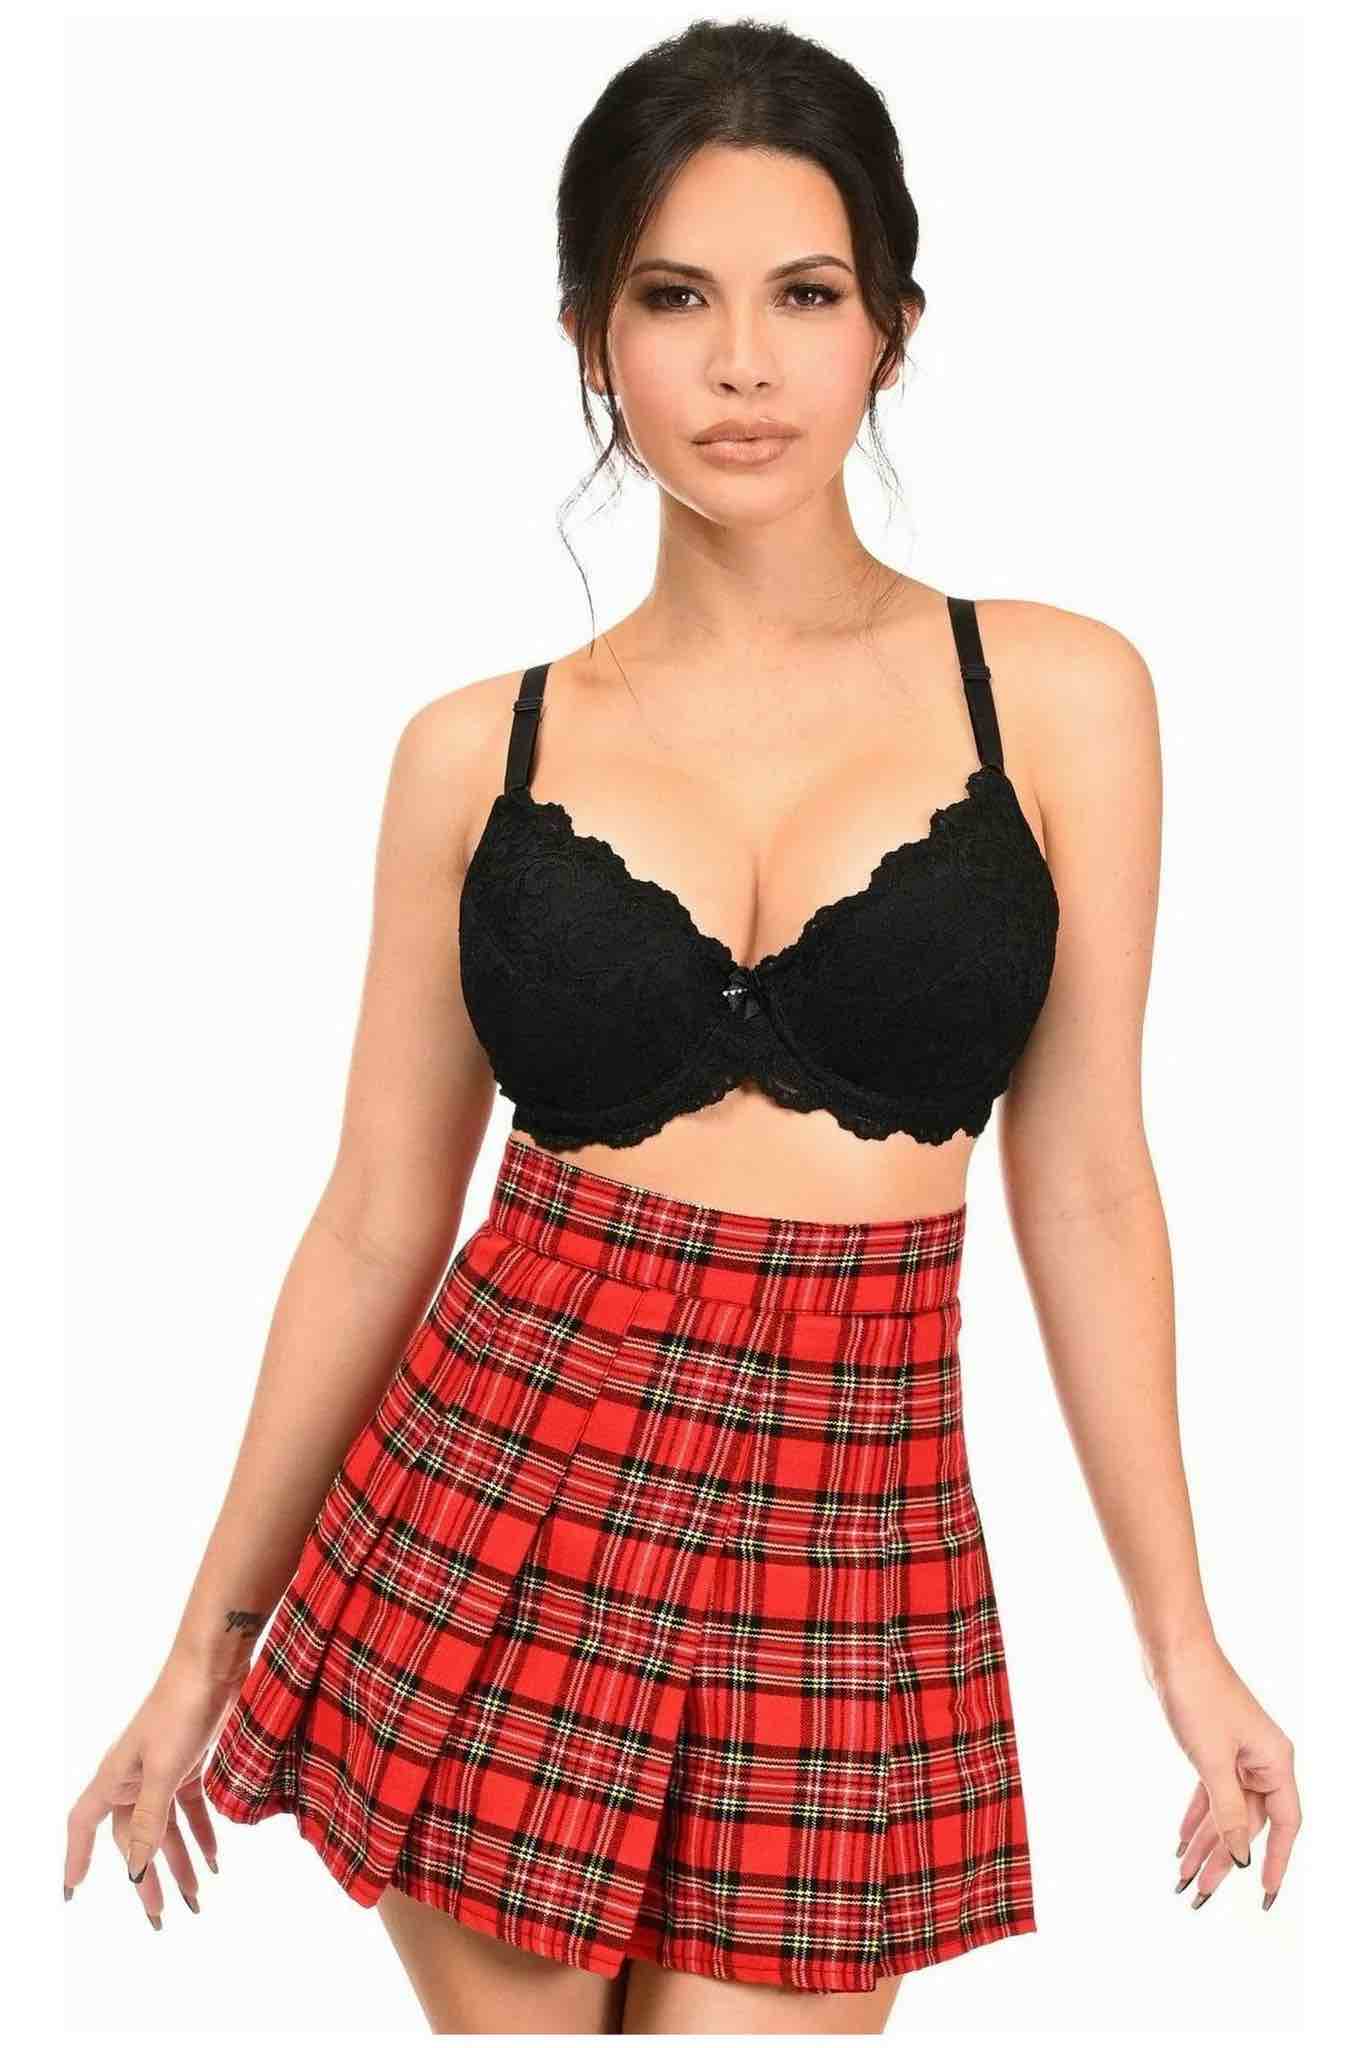 A model wearing a black bra and the Red Plaid Skirt, front view.